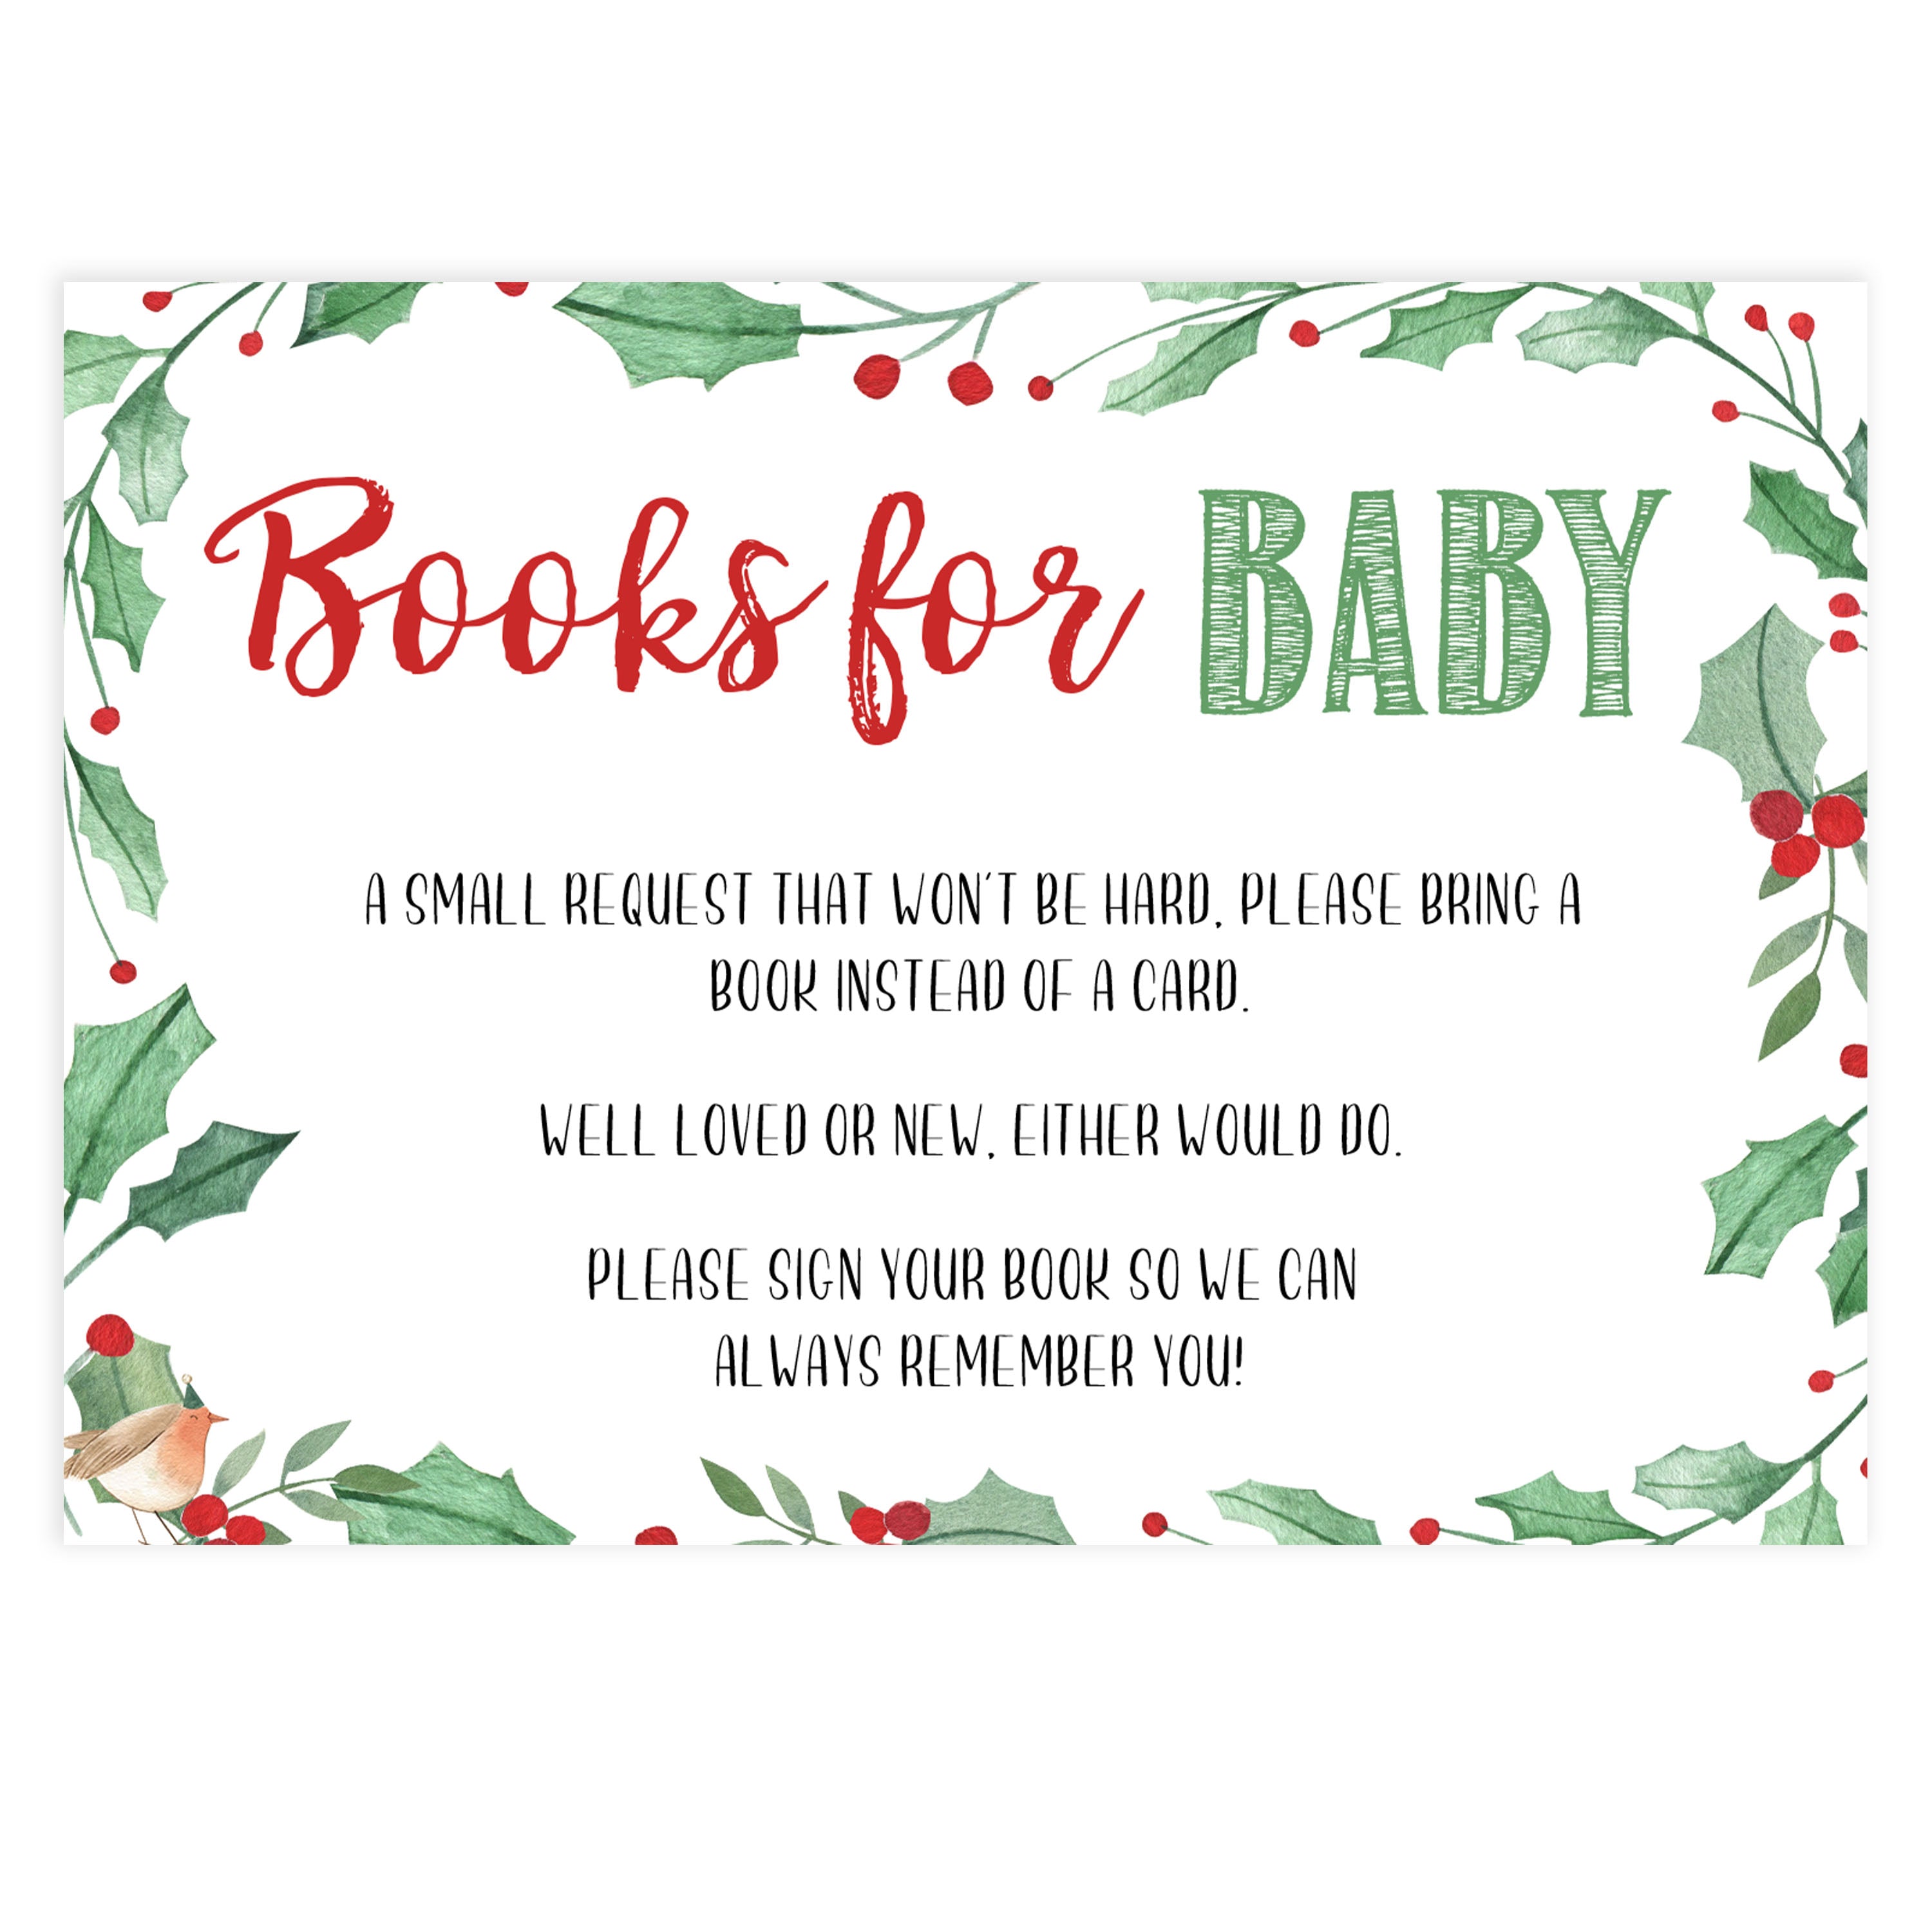 Christmas baby shower games, bring a book, books for baby,, festive baby shower games, best baby shower games, top 10 baby games, baby shower ideas, baby shower games